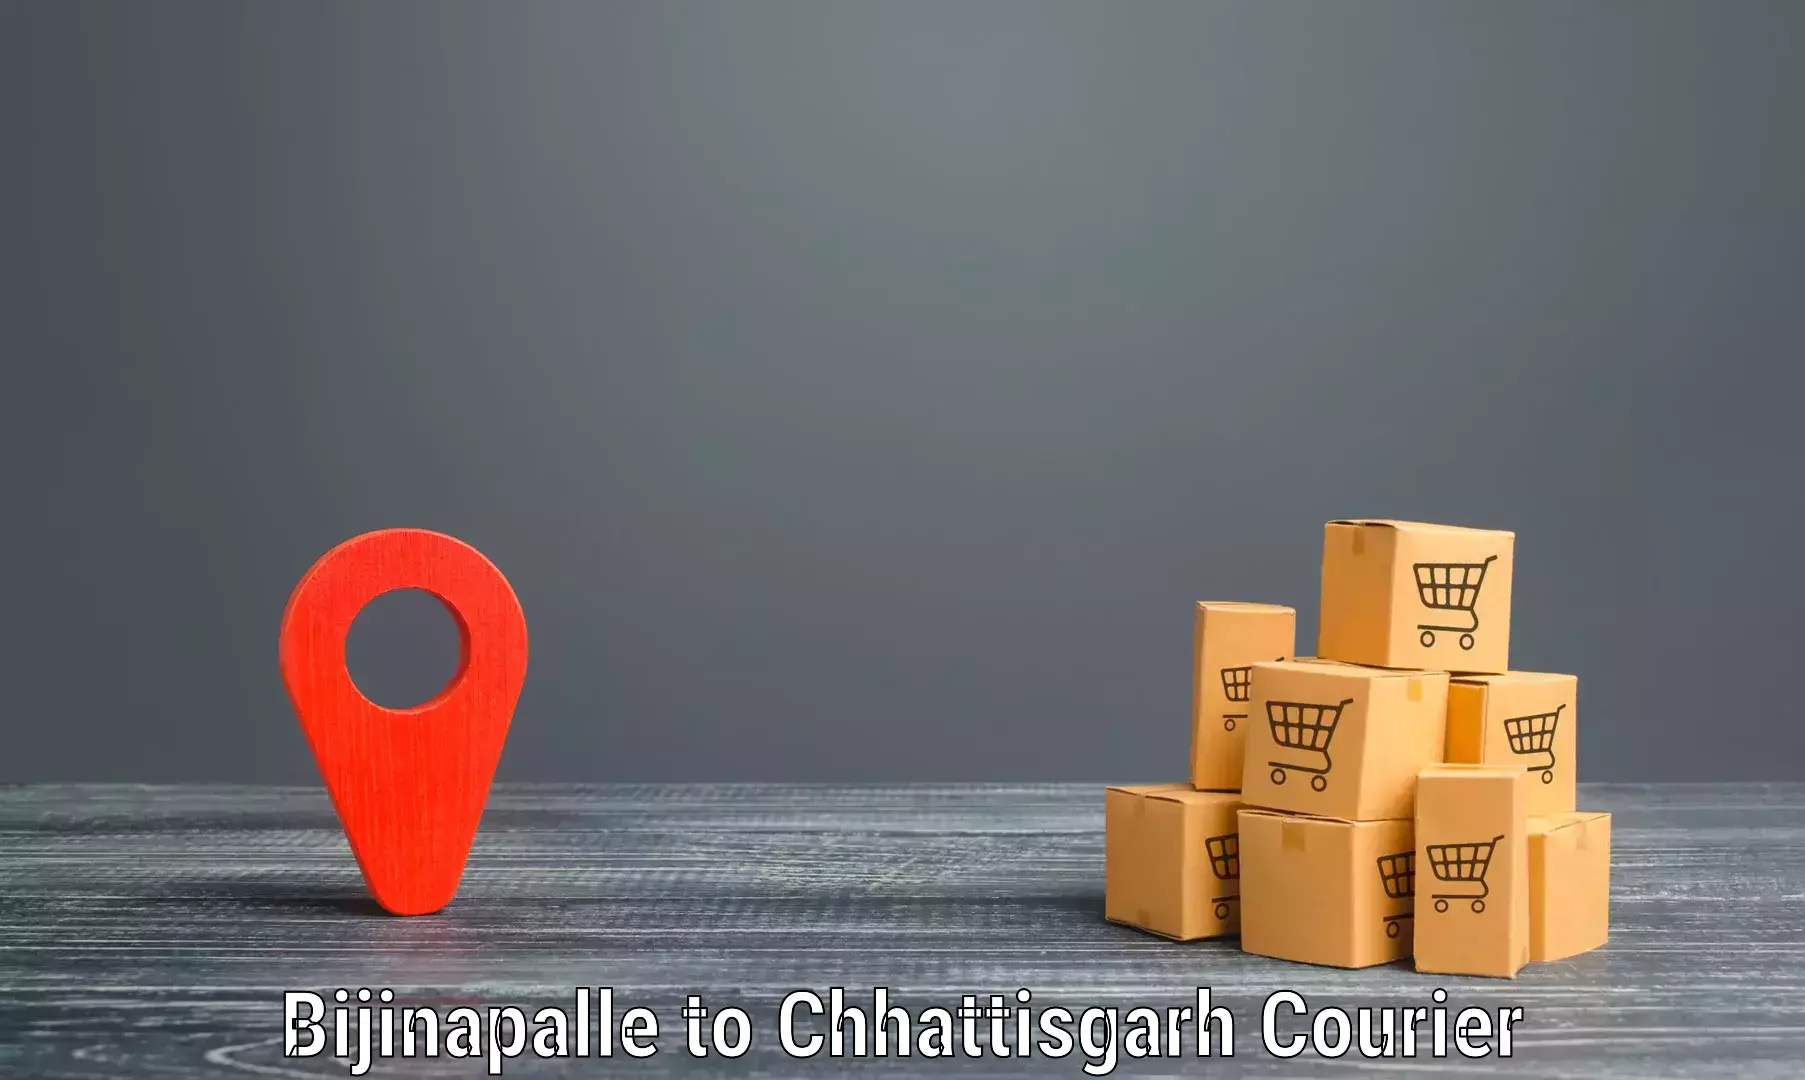 Round-the-clock parcel delivery Bijinapalle to Berla